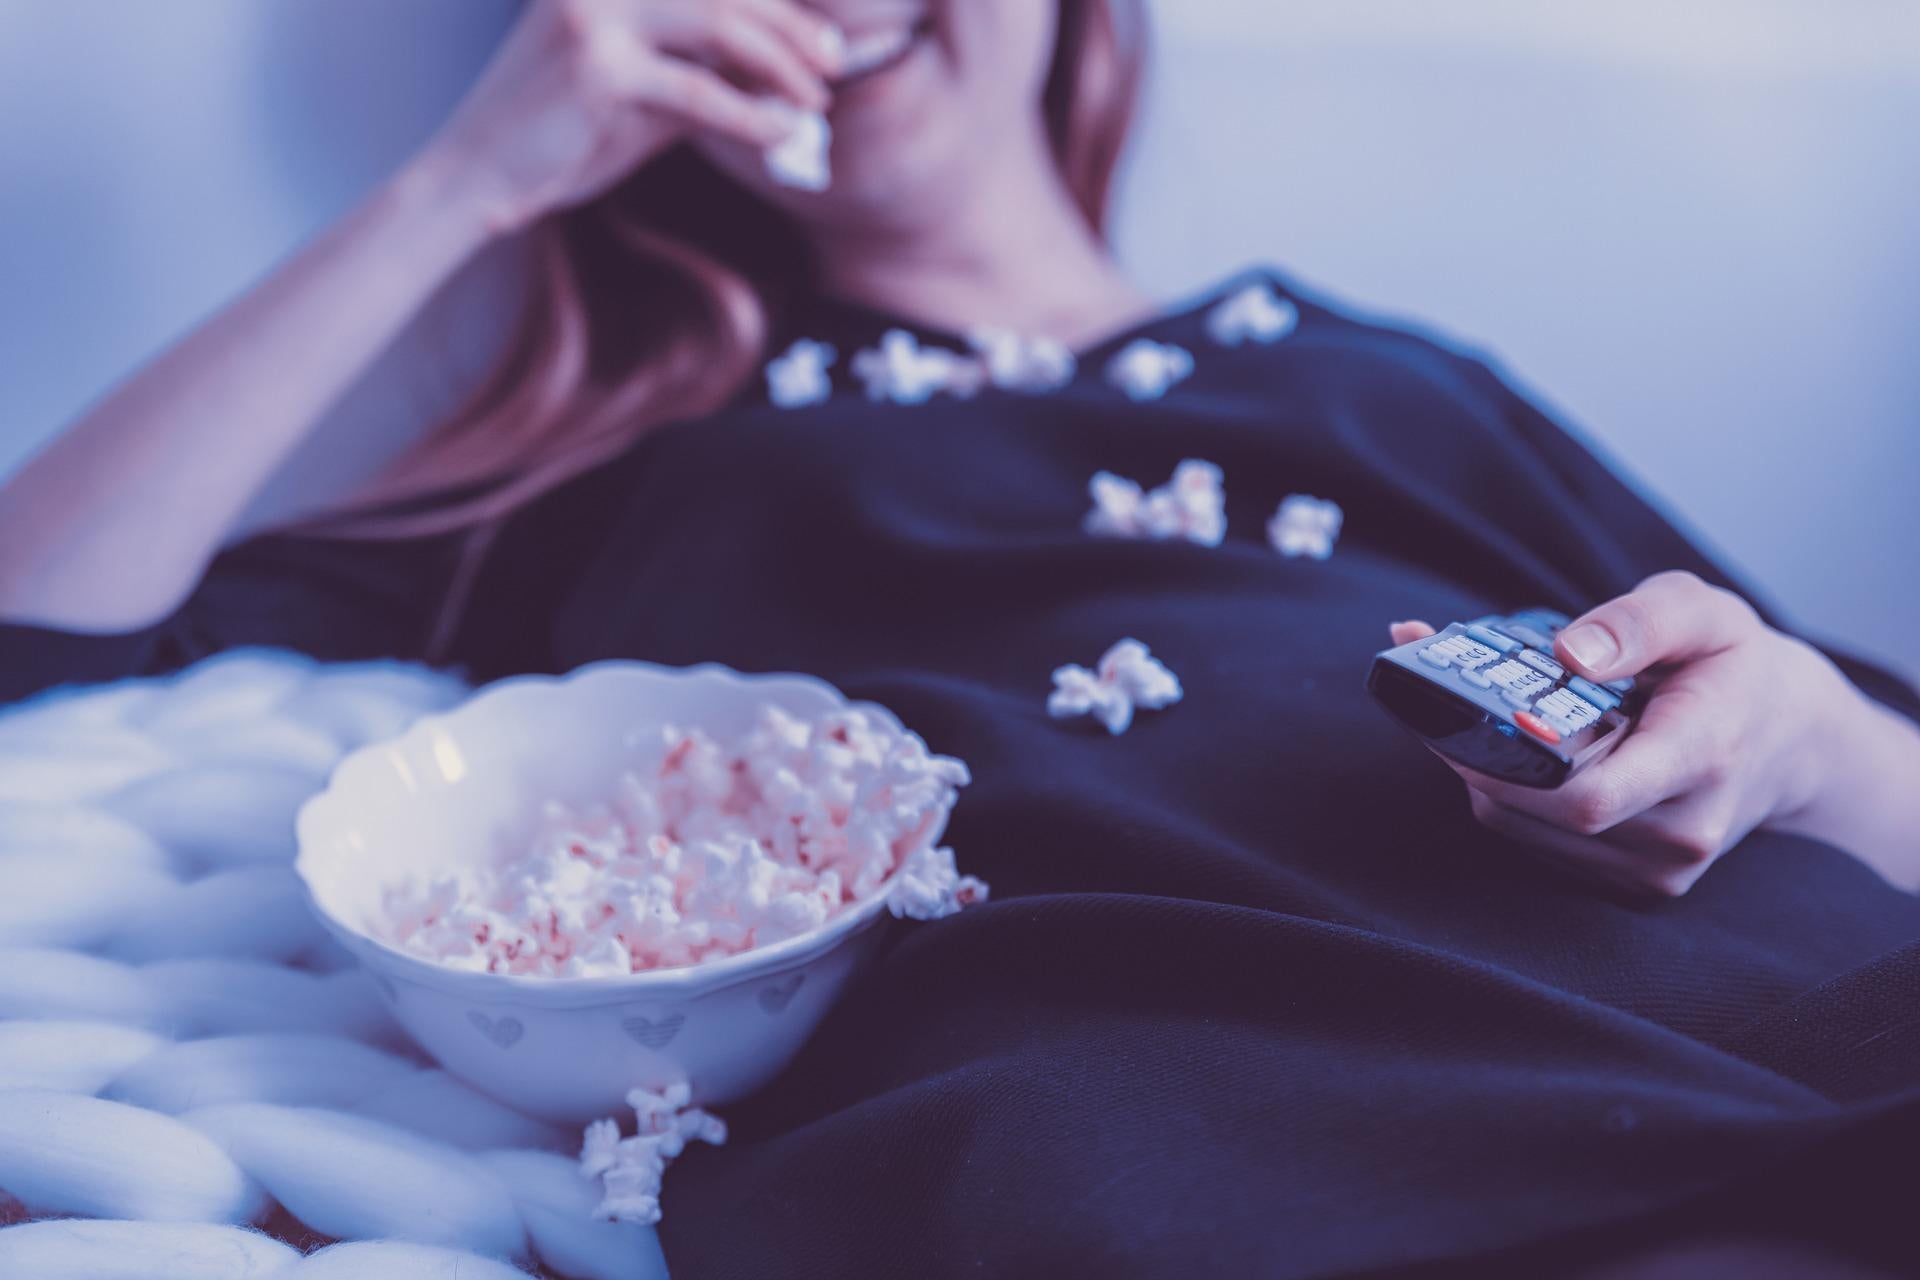 The Strange Connection Between Heart Diseases And Your TV Remote Control - DSF Antique Jewelry